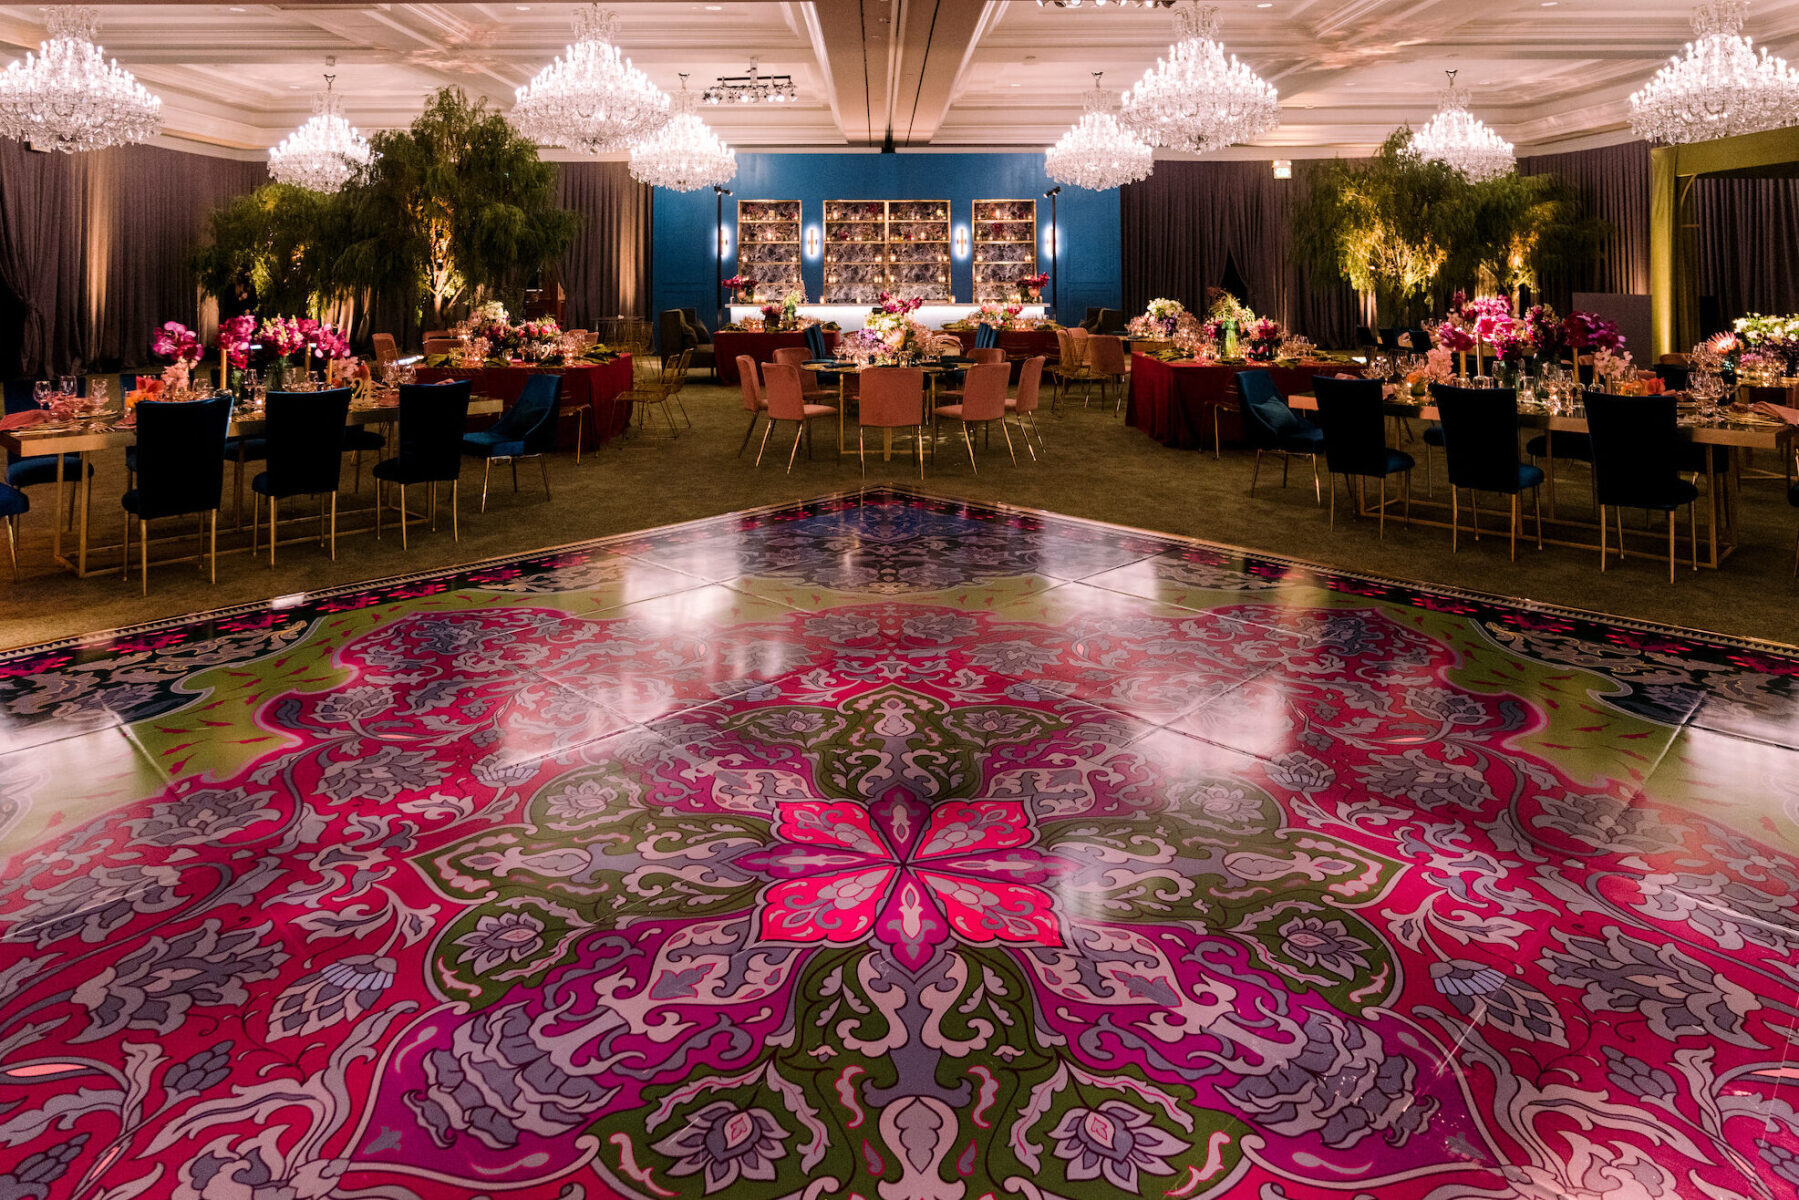 A glam enchanted wedding reception in a ballroom of a hotel in California, with a rug-inspired dancefloor and draped walls.